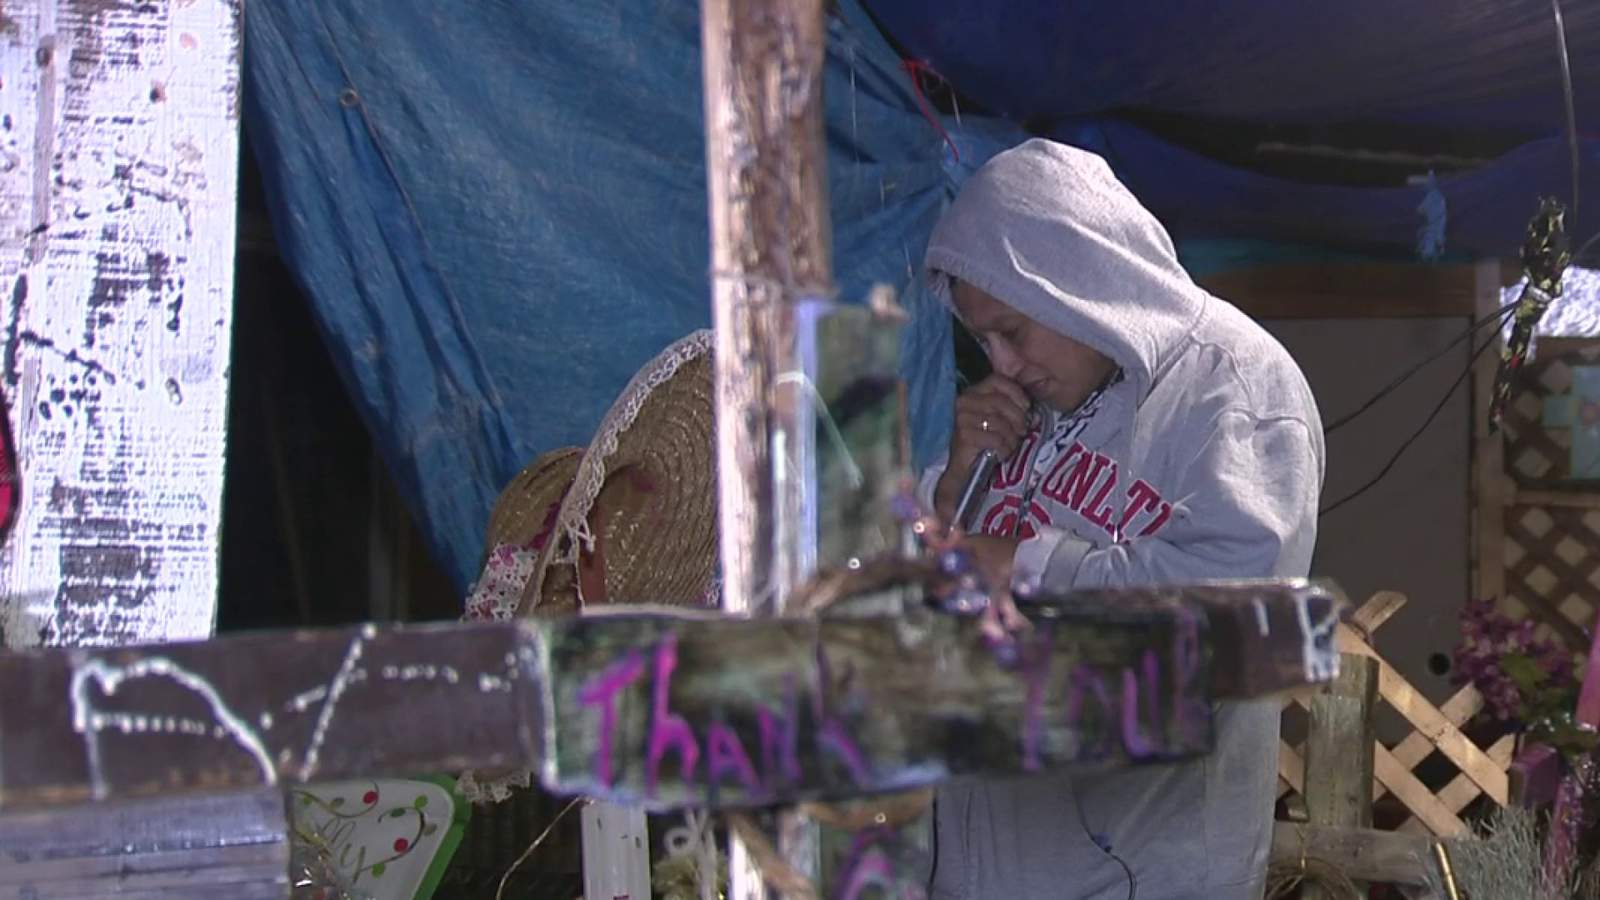 What’s Up South Texas!: Disabled woman serves homeless, shares faith through custom-made crosses